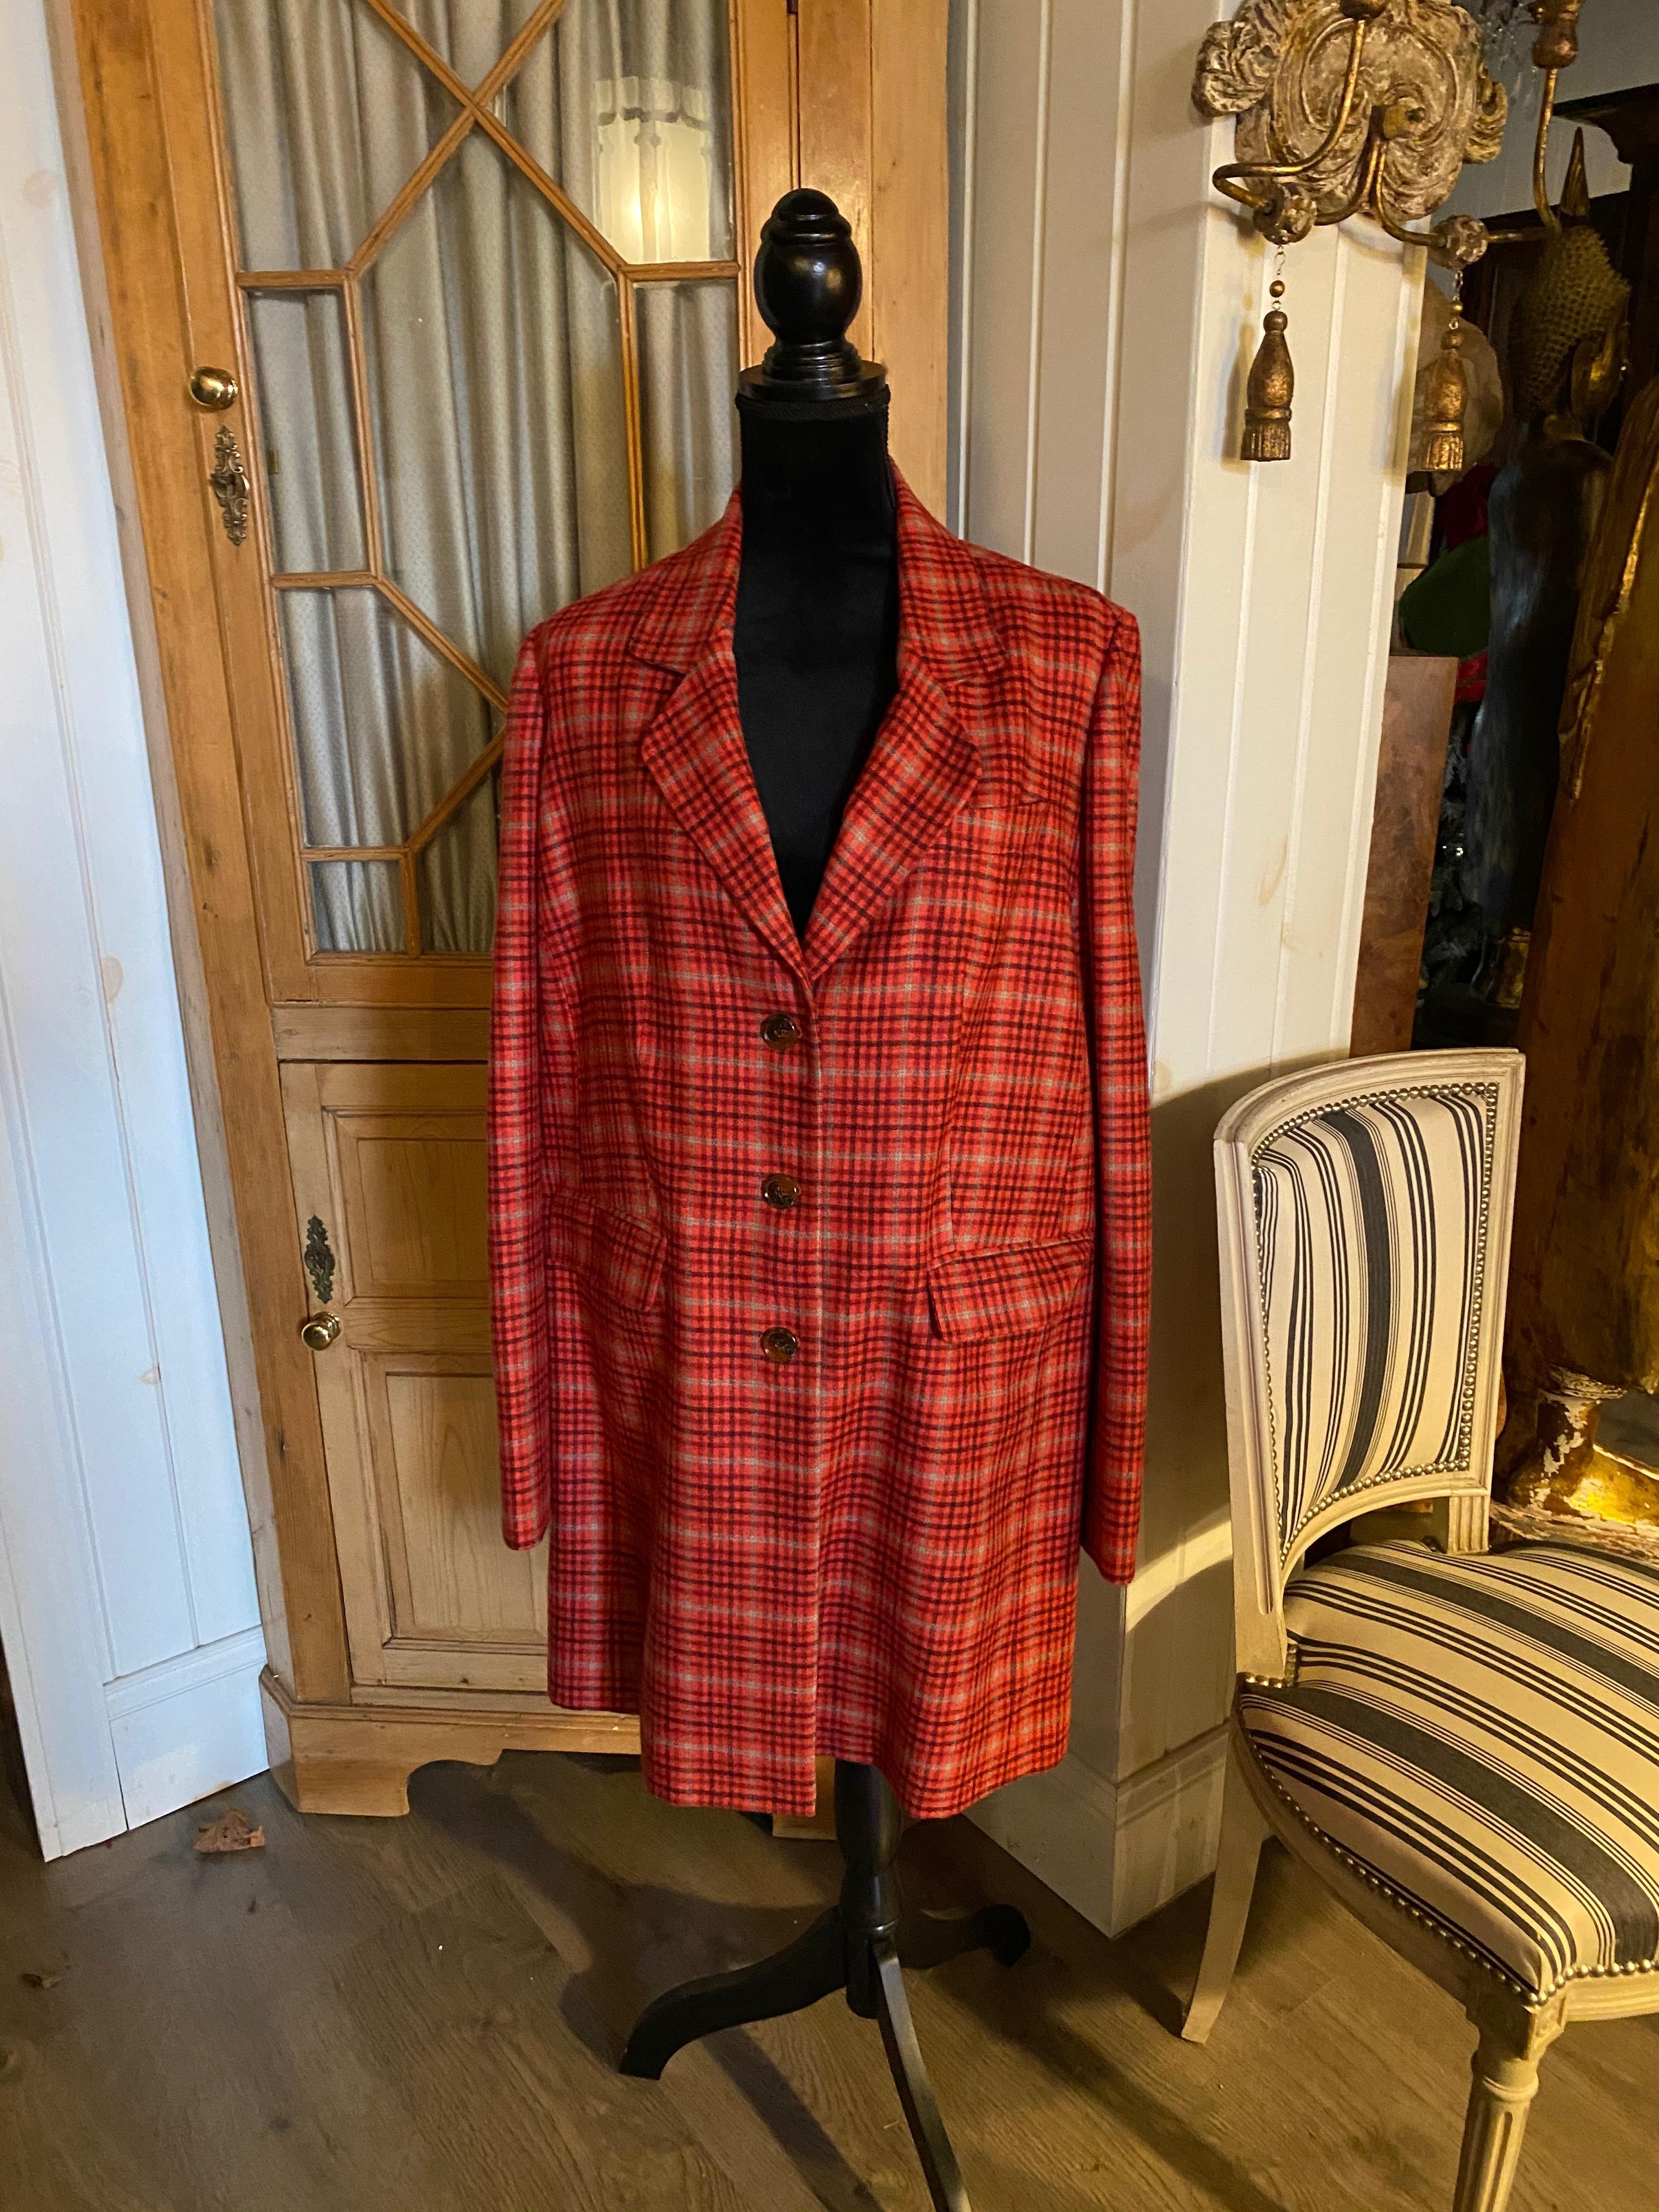 Two Sam Kori George Couture Atelier Cashmere Coats.
Priced per coat.
Comprising of a red plaid, and a grey and red window pane coat
Approximately size 12-14, Worn once.